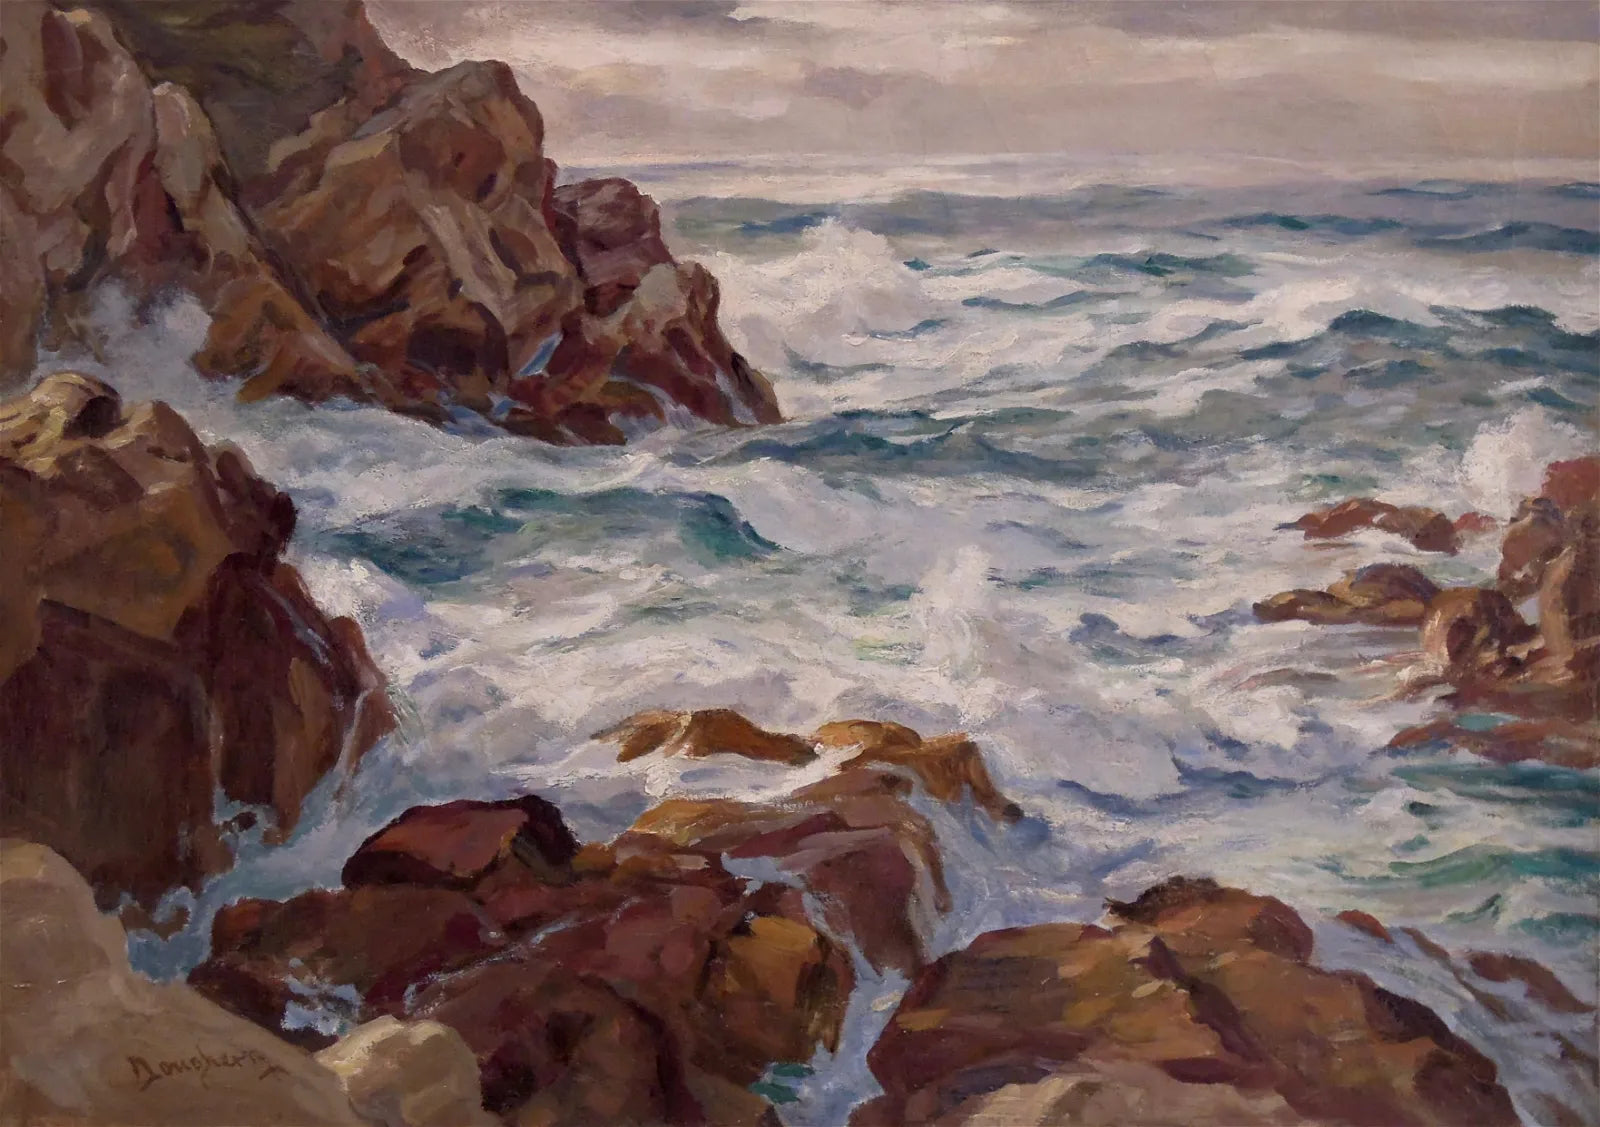 AW613: Paul Dougherty, "Foaming Seas" - Early 20th C Oil on Canvas